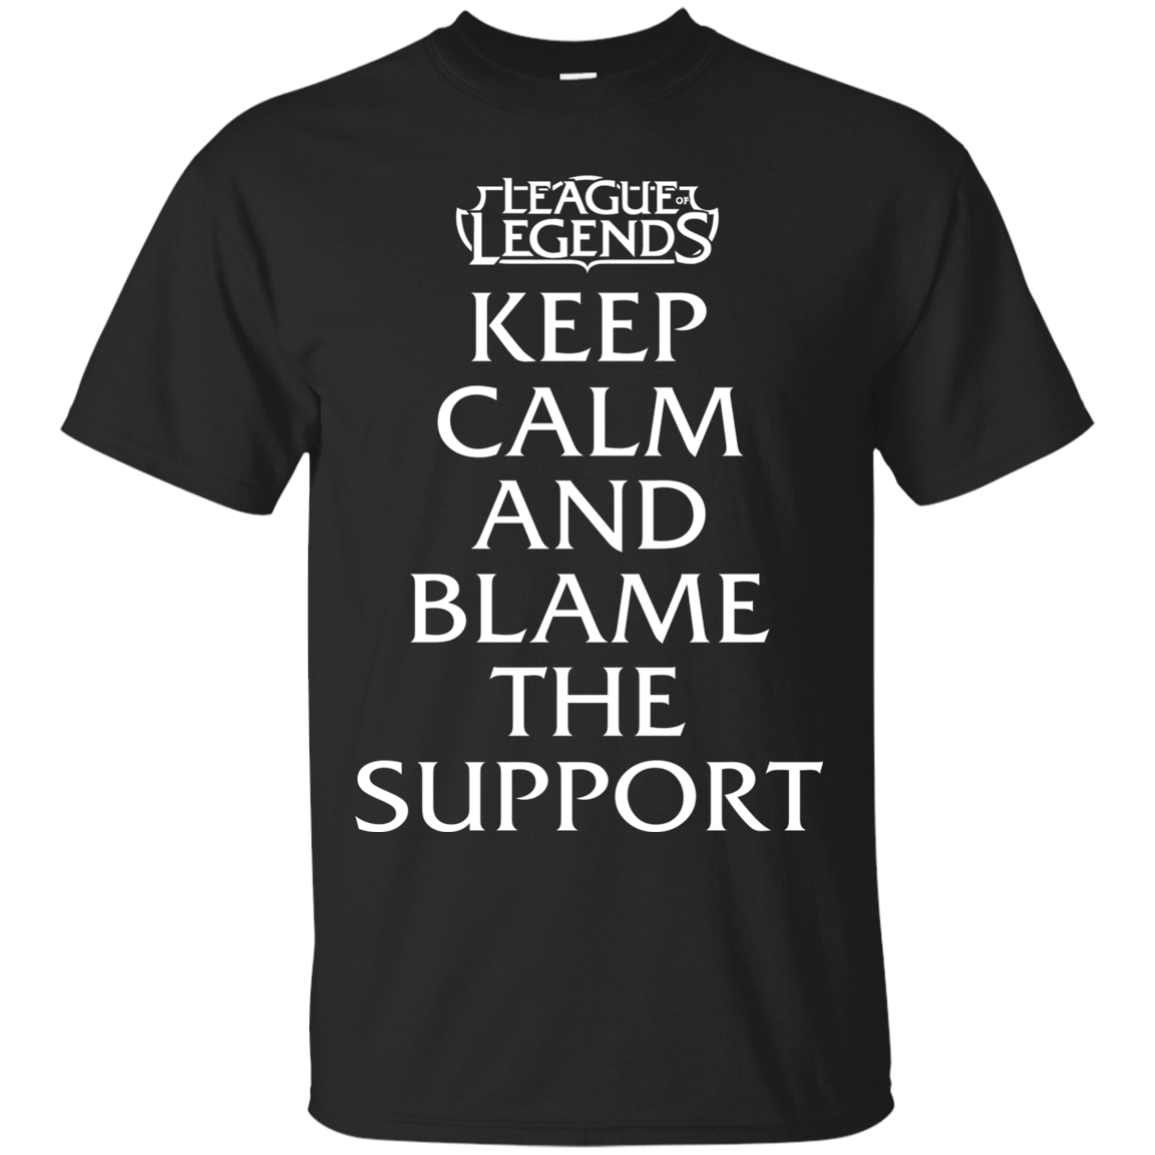 League of Legends - Keep Calm And Blame The Support Shirt, Hoodie